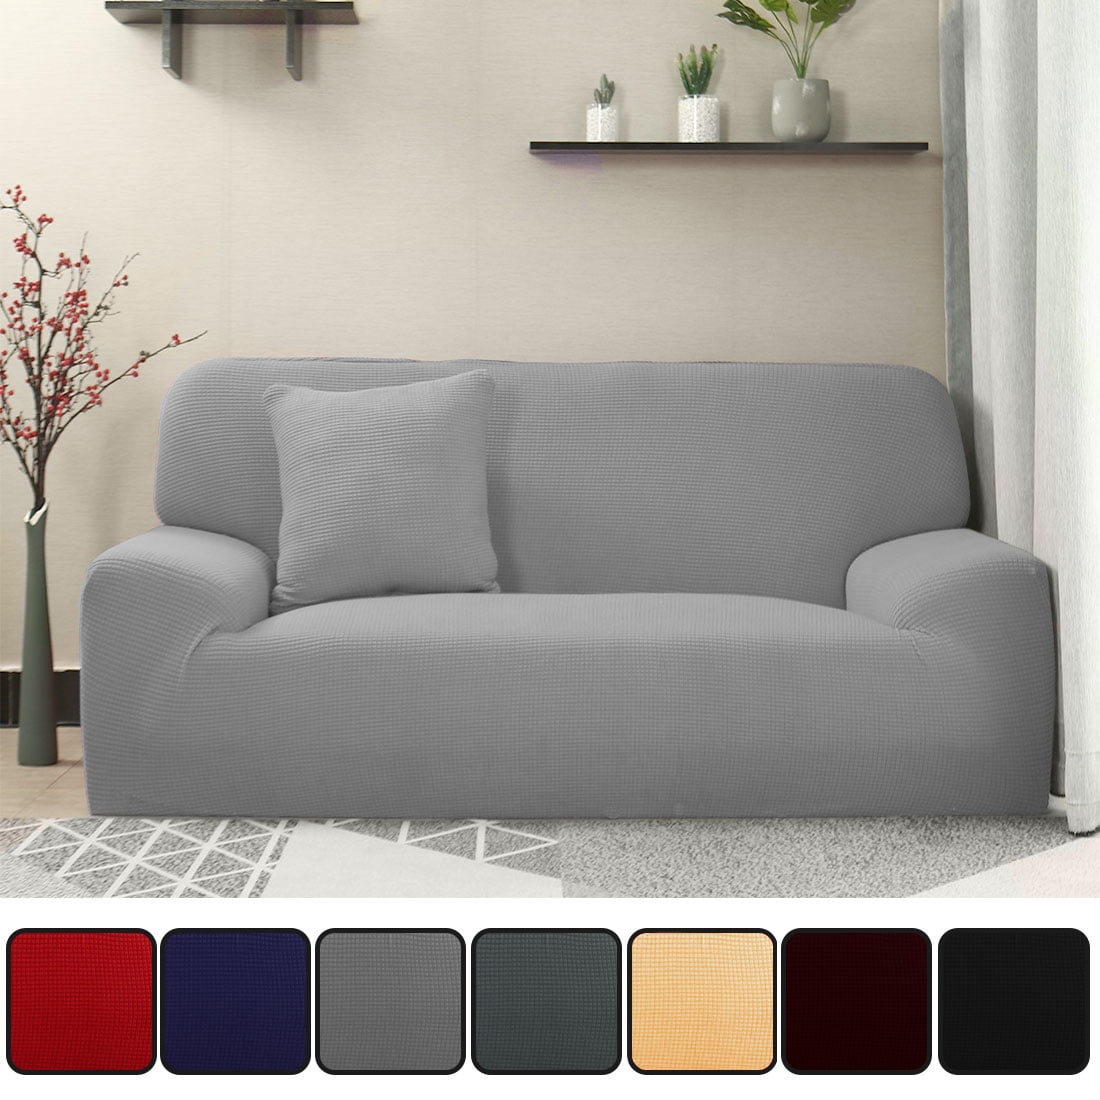 Jacquard Sofa Covers 1 Piece 1 2 3 4 Seater Couch Cover Furniture Protector Gray 92 122 Walmart Canada